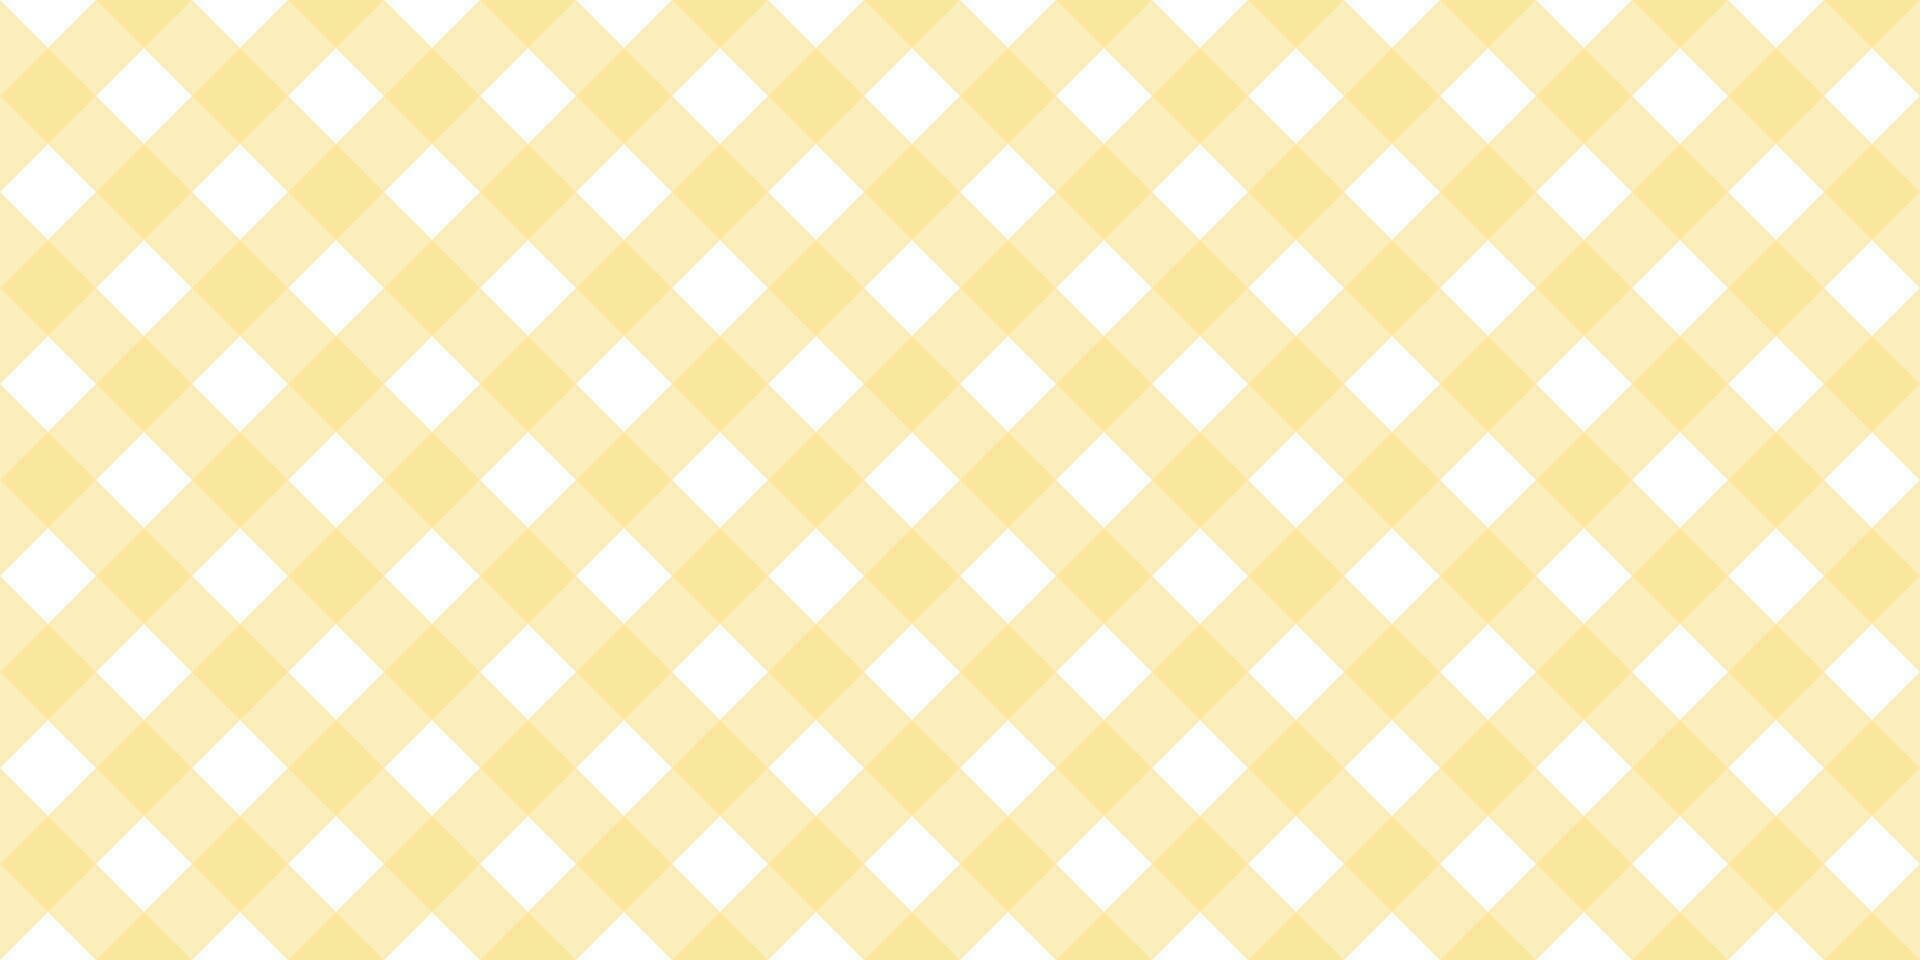 Gingham diagonal seamless pattern in yellow pastel color. Vichy plaid design for Easter holiday textile decorative. Vector checkered pattern for fabric - picnic blanket, tablecloth, dress, napkin.